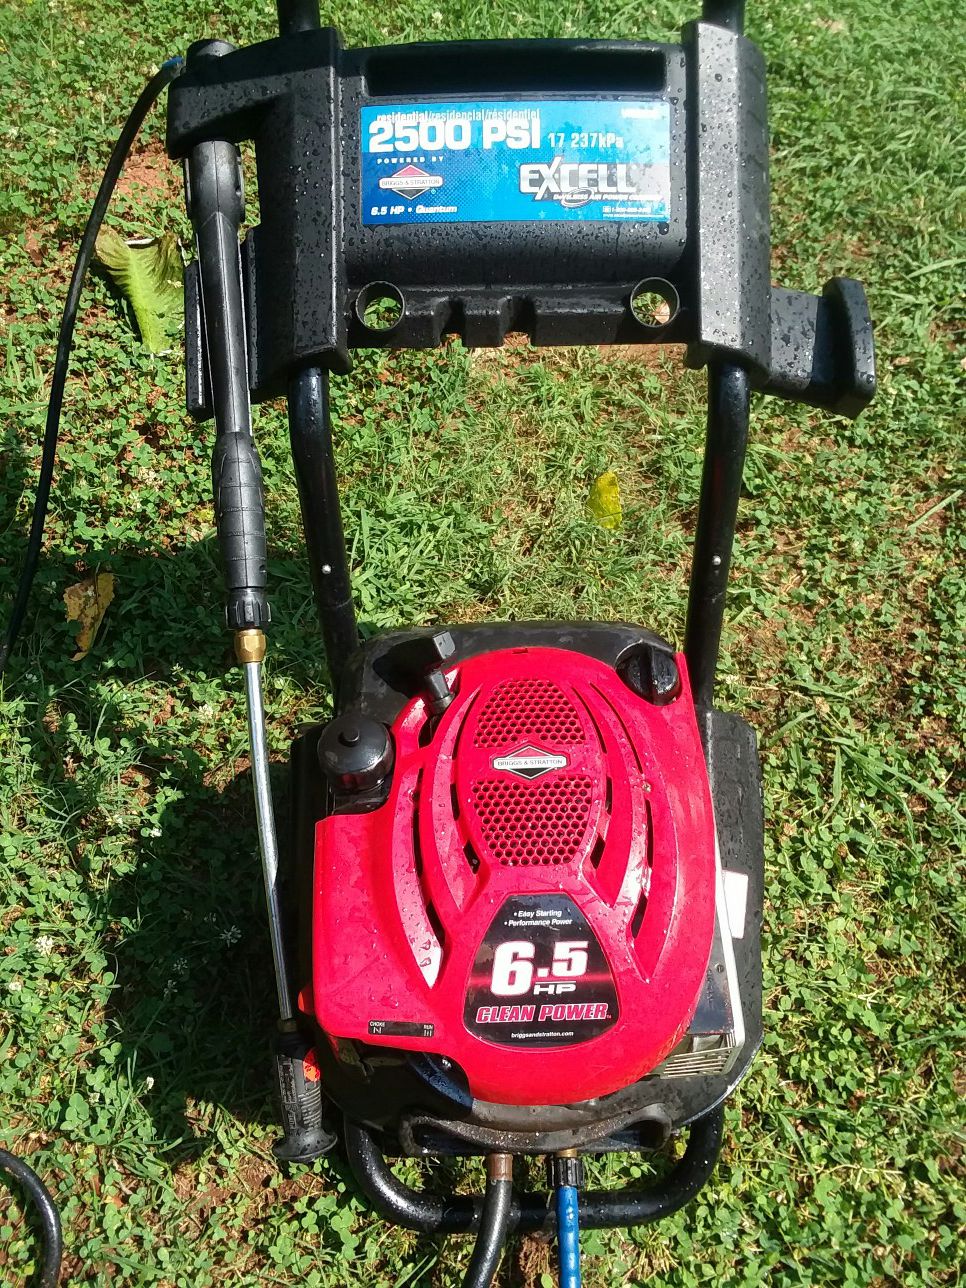 Excell pressure washer 2500 psi